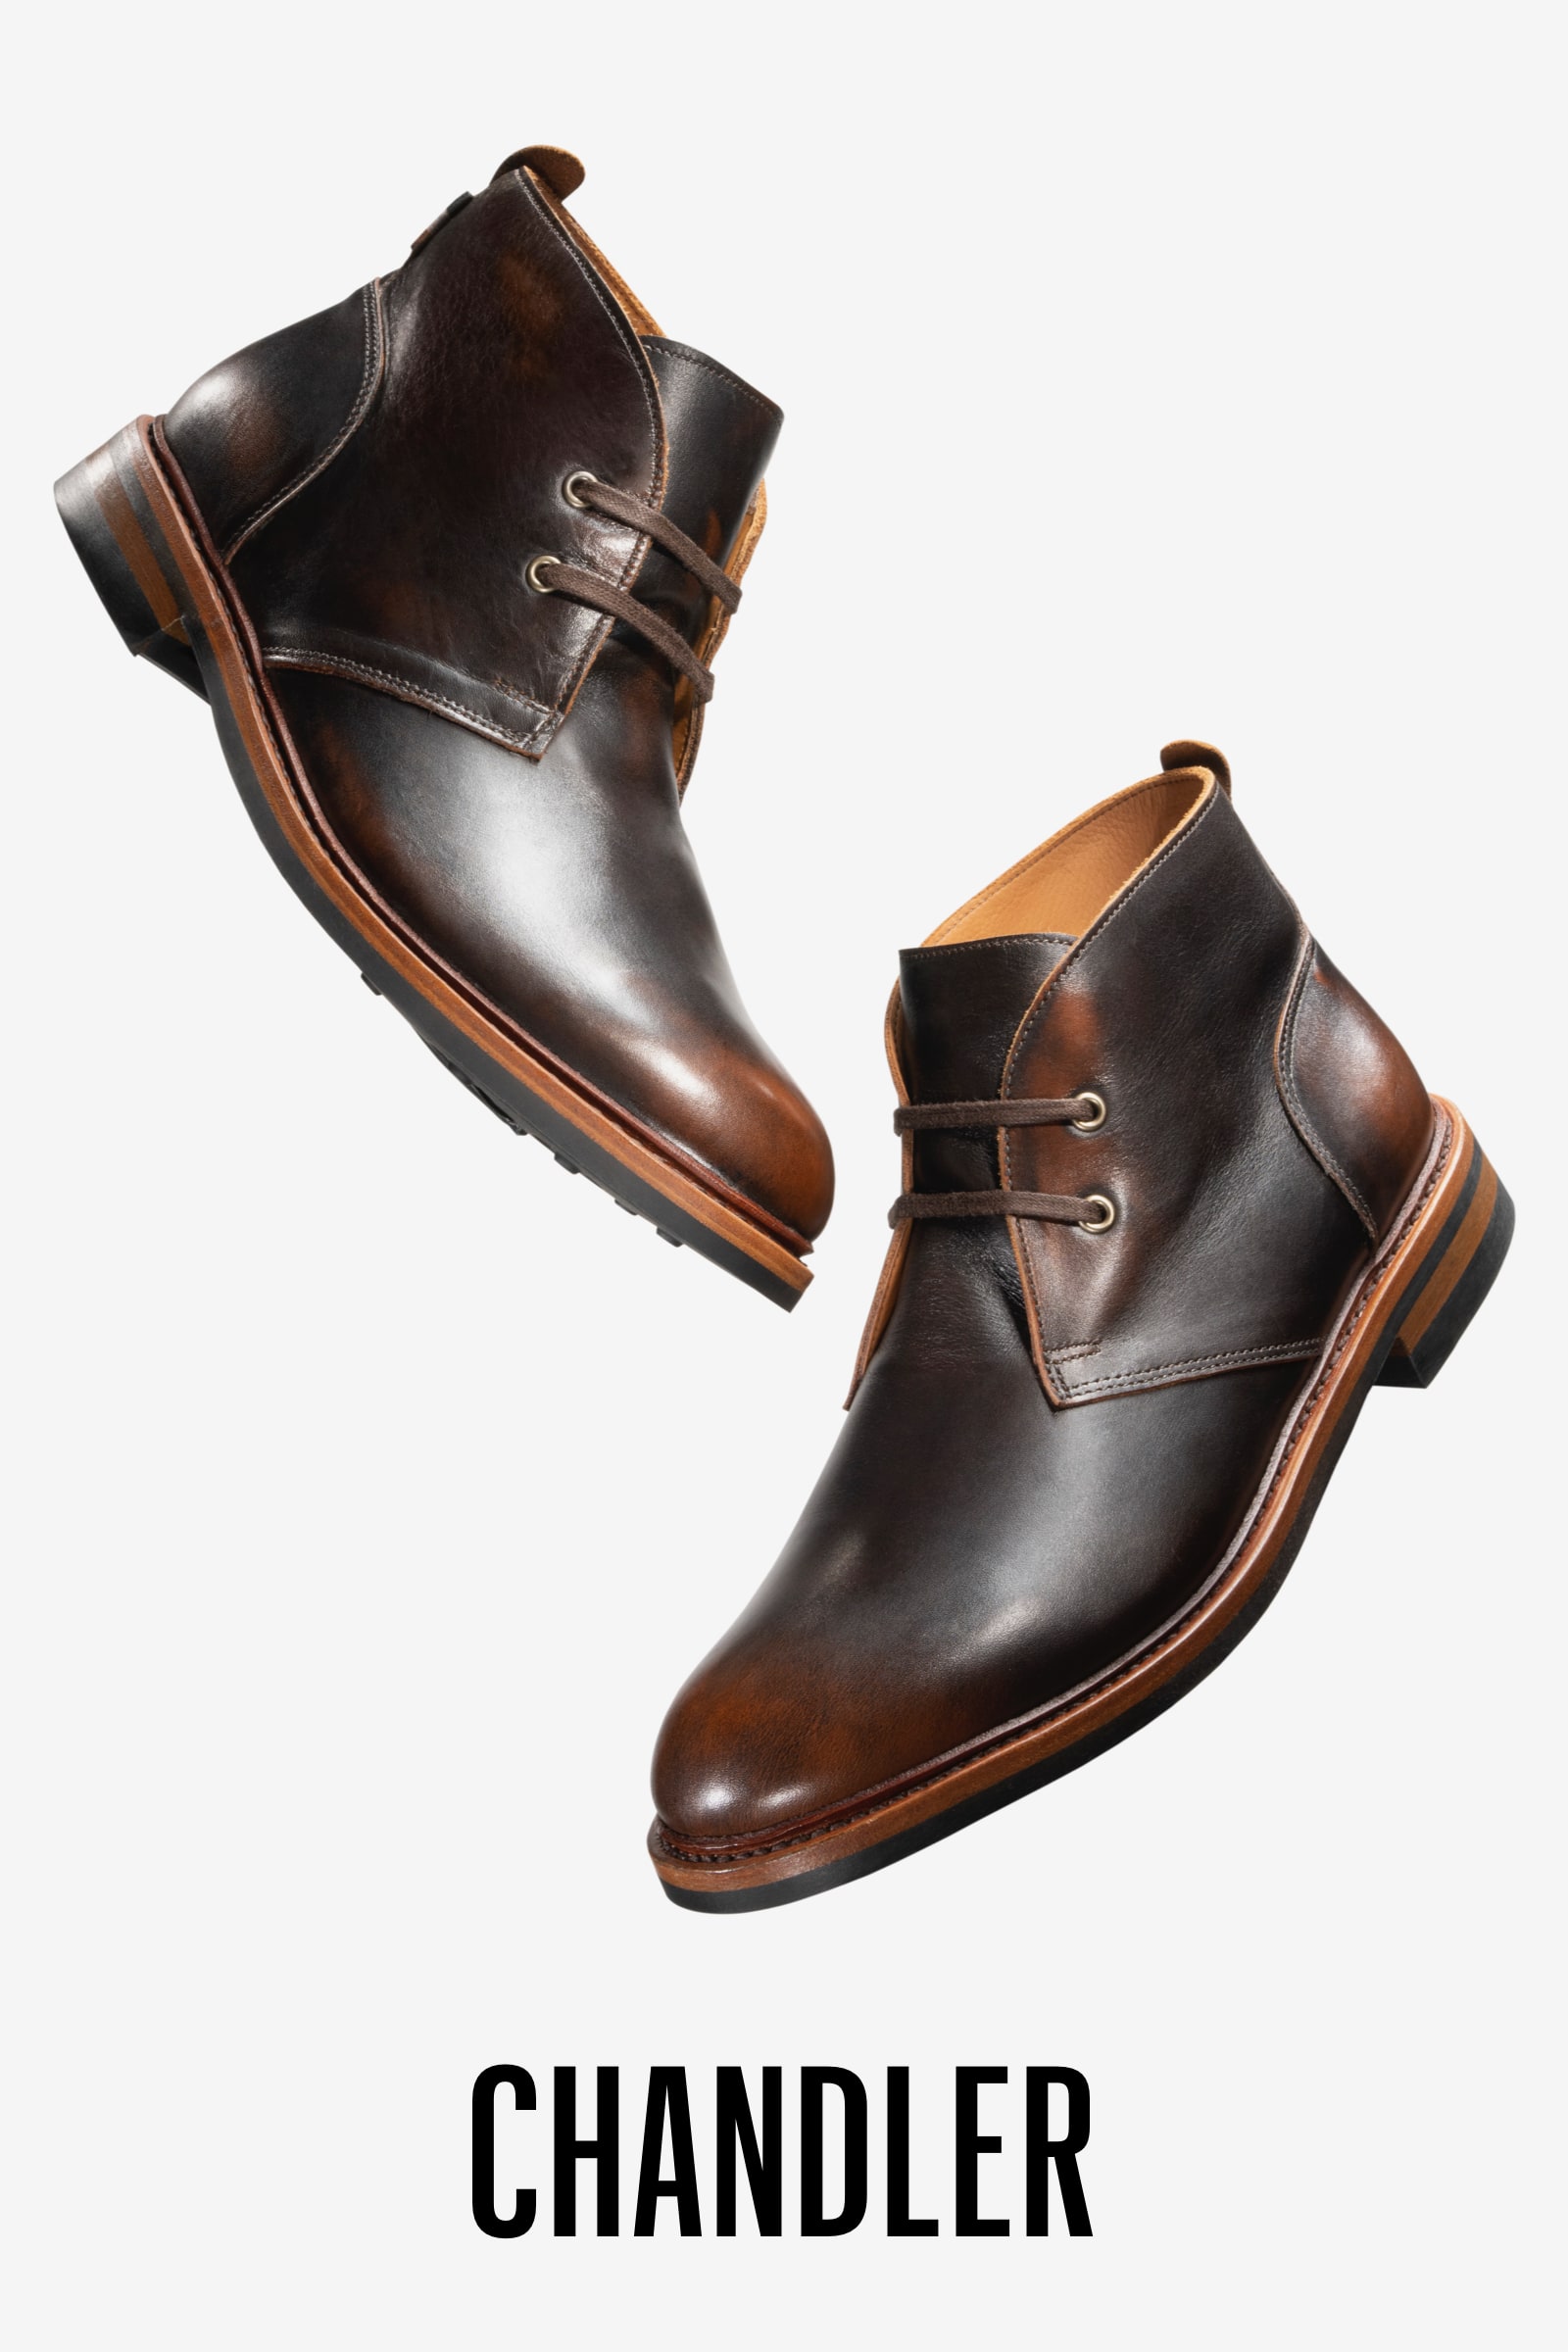 Shop Our Iconic Chandler Chukka Boot